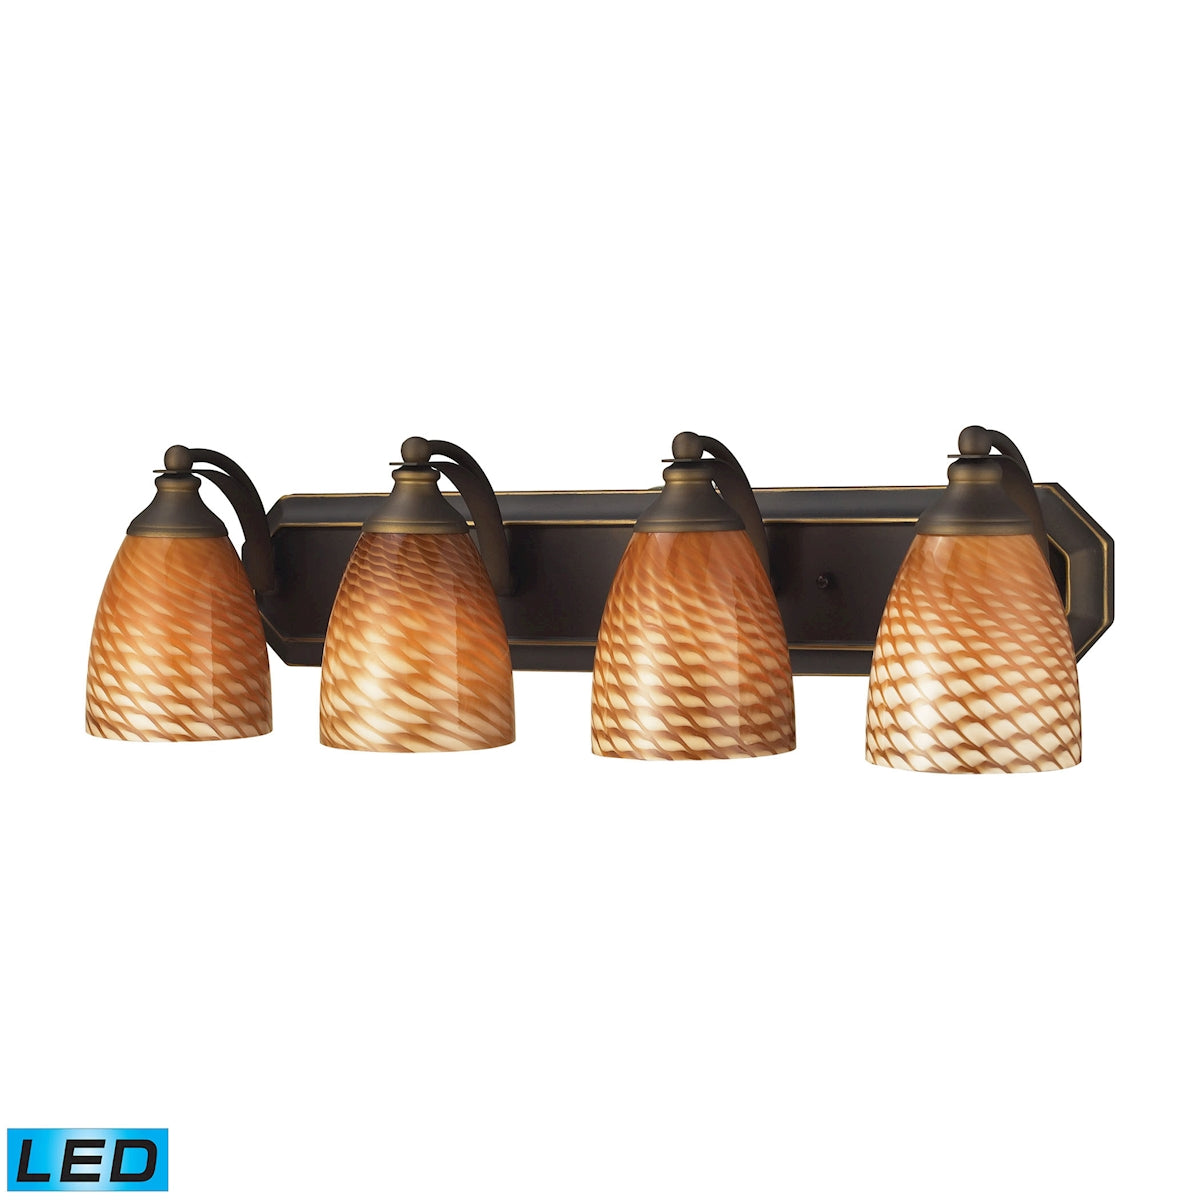 ELK Lighting 570-4B-C-LED Mix-N-Match Vanity 4-Light Wall Lamp in Aged Bronze with Cocoa Glass - Includes LED Bulbs